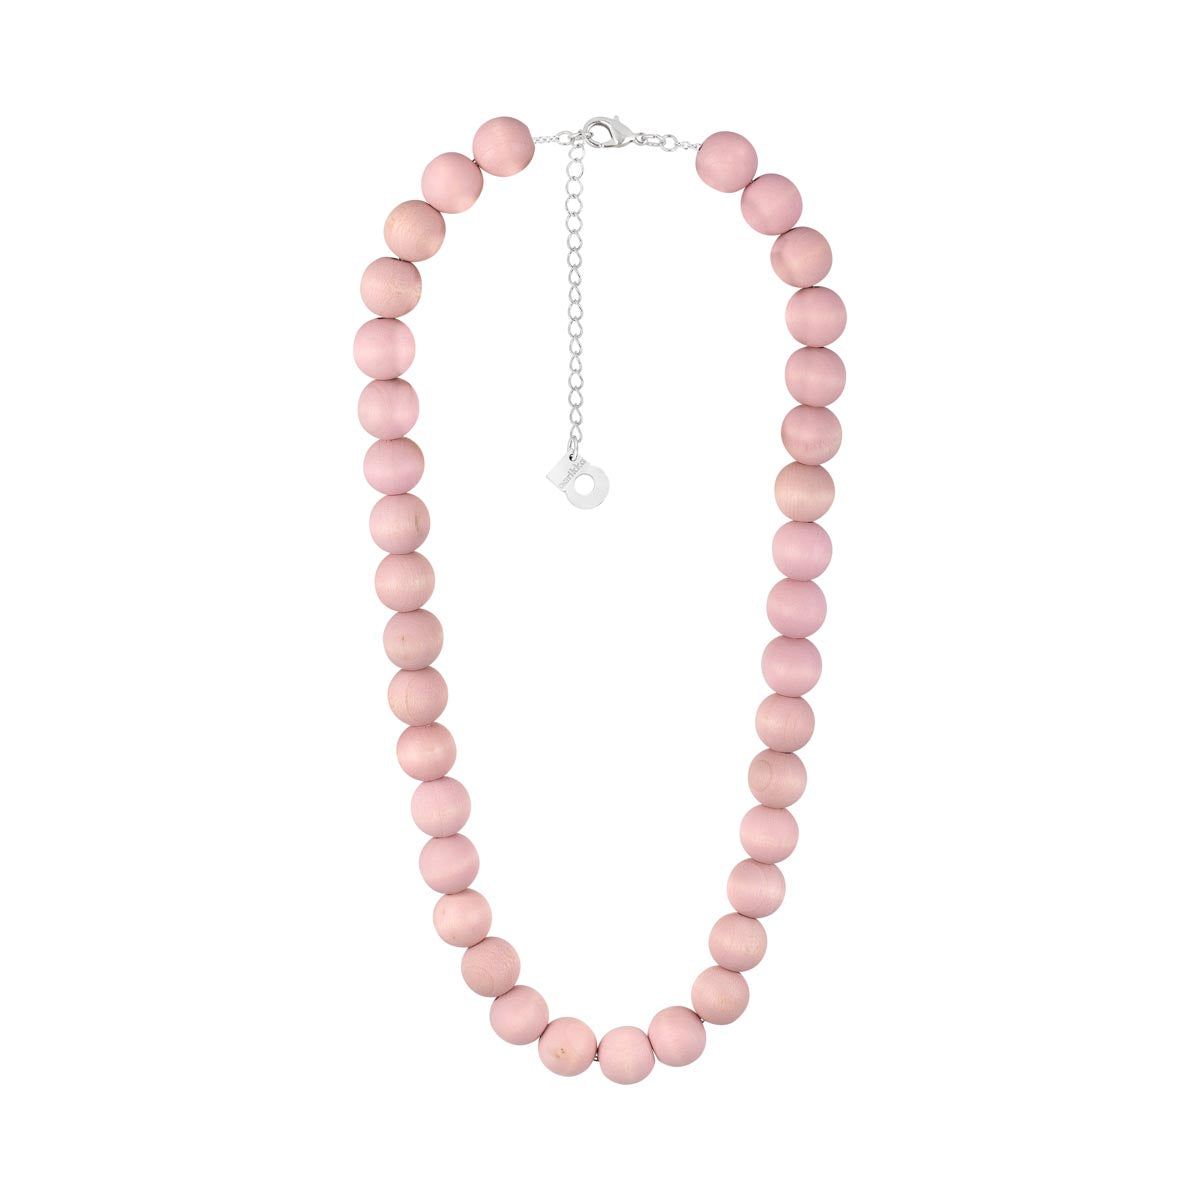 Aito necklace, pink